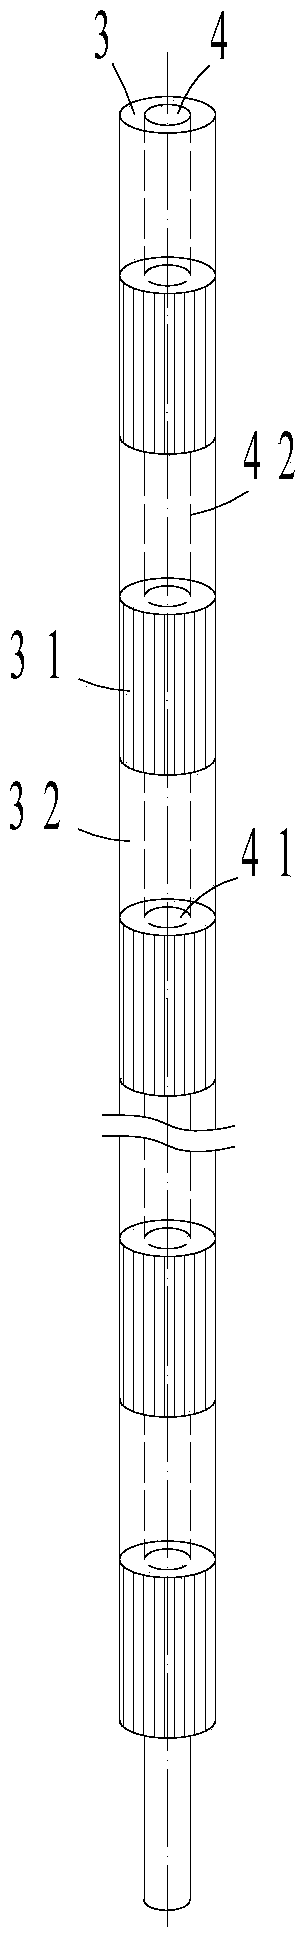 Control rod capable of flattening axial power distribution of reactor core and control rod assembly